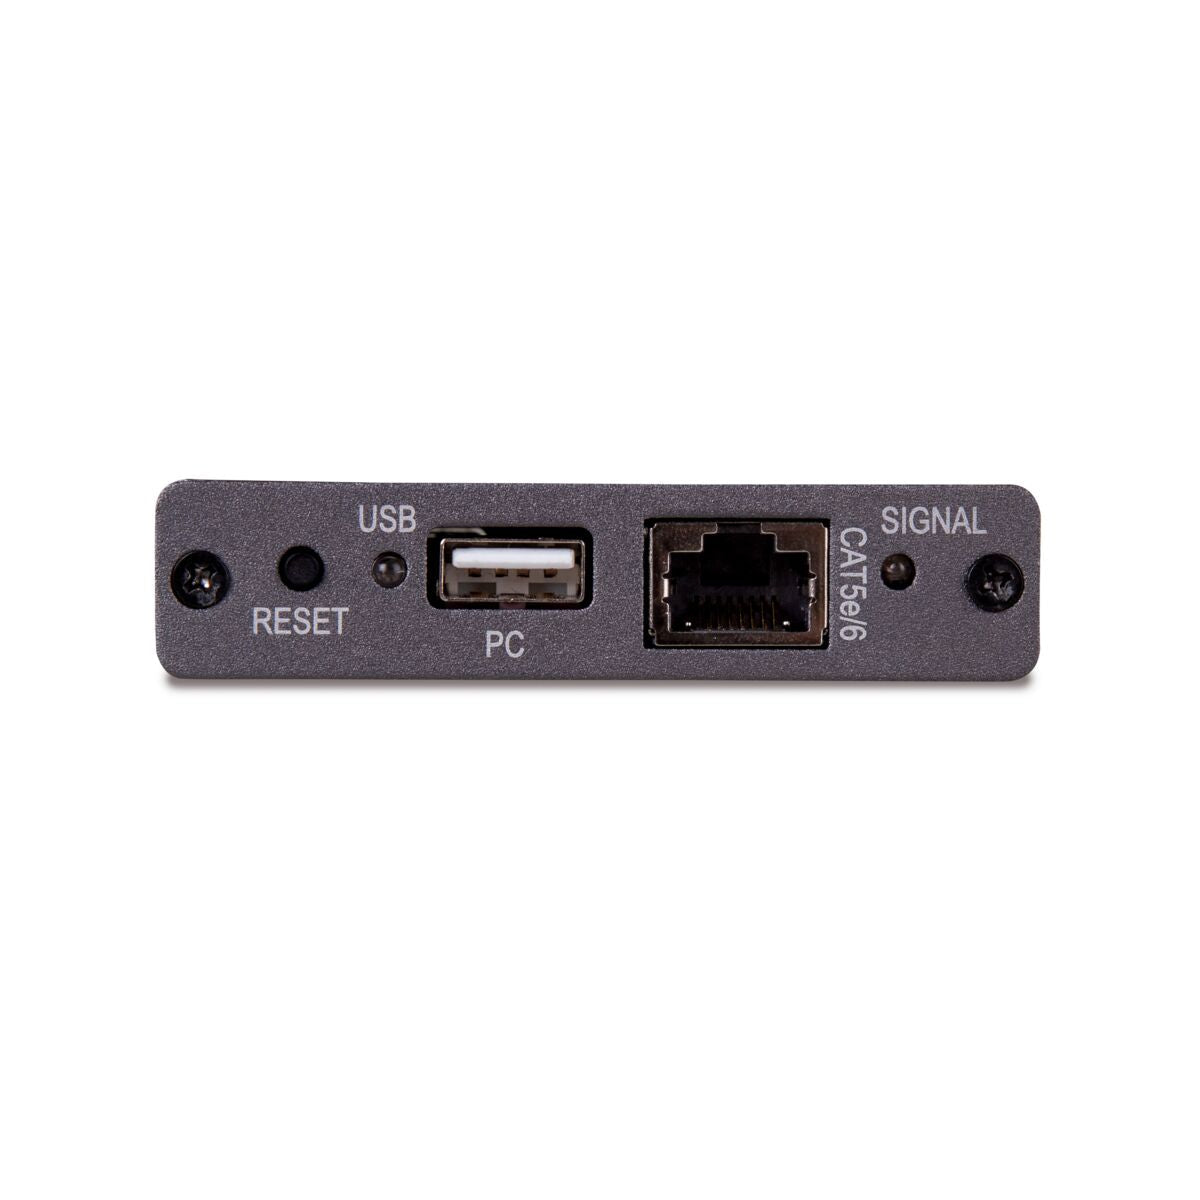 MegaView 76 - HDMI Extender UTP - Side View Image CAT Connection HDMI Transmitter RIGHT | Marmitek